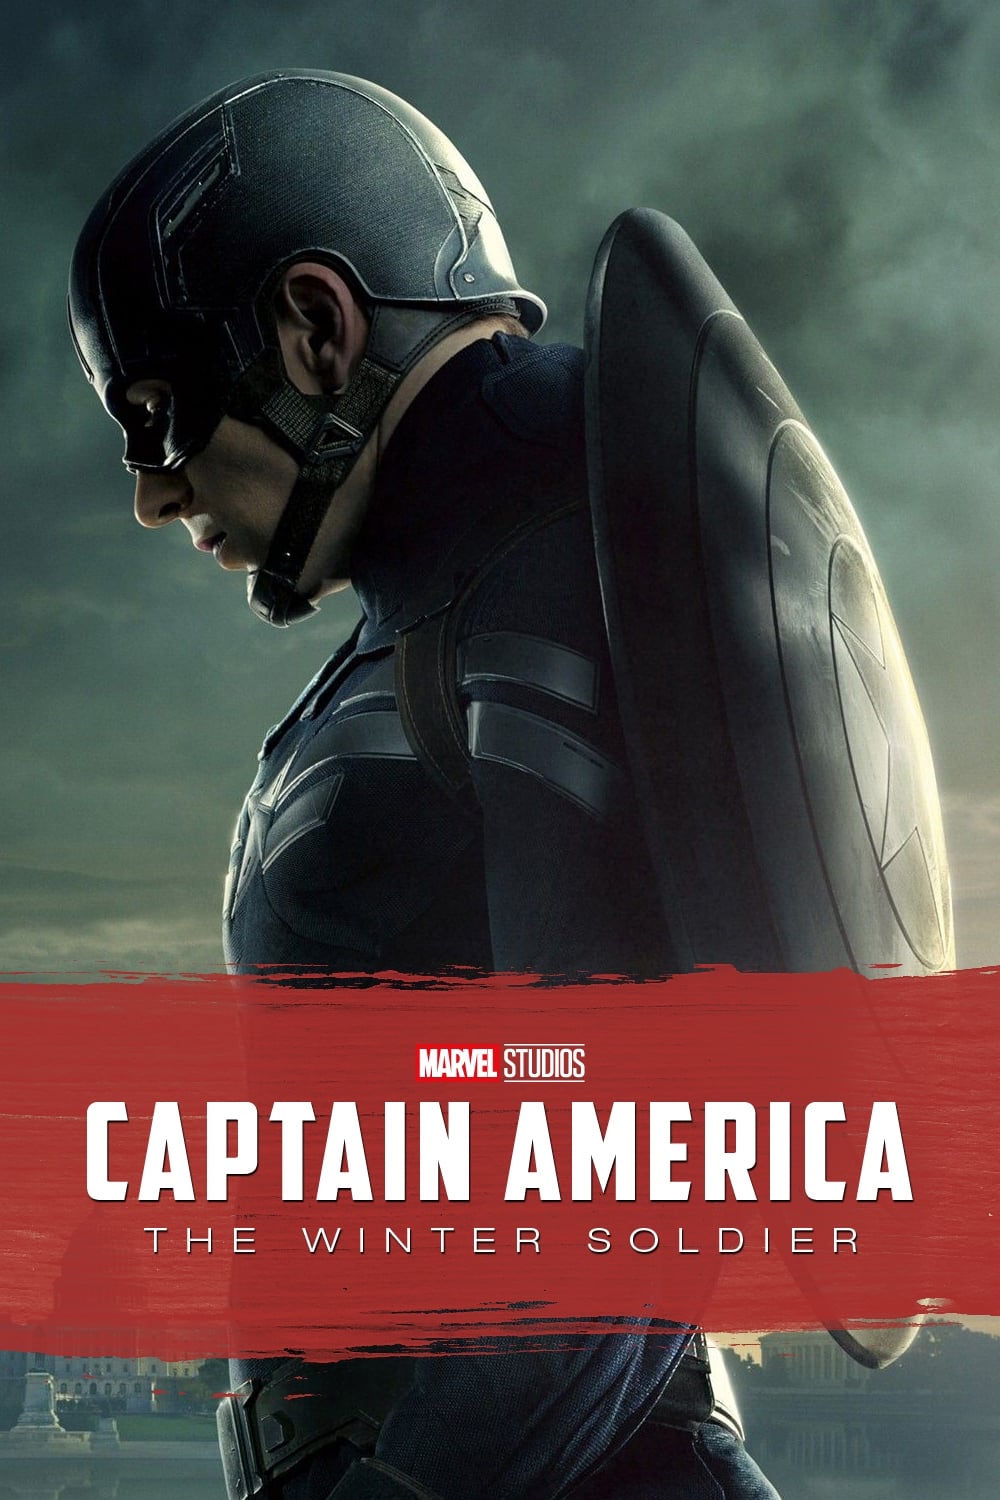 Captain America The Winter Soldier (2014) REMUX 4K HDR Latino – CMHDD